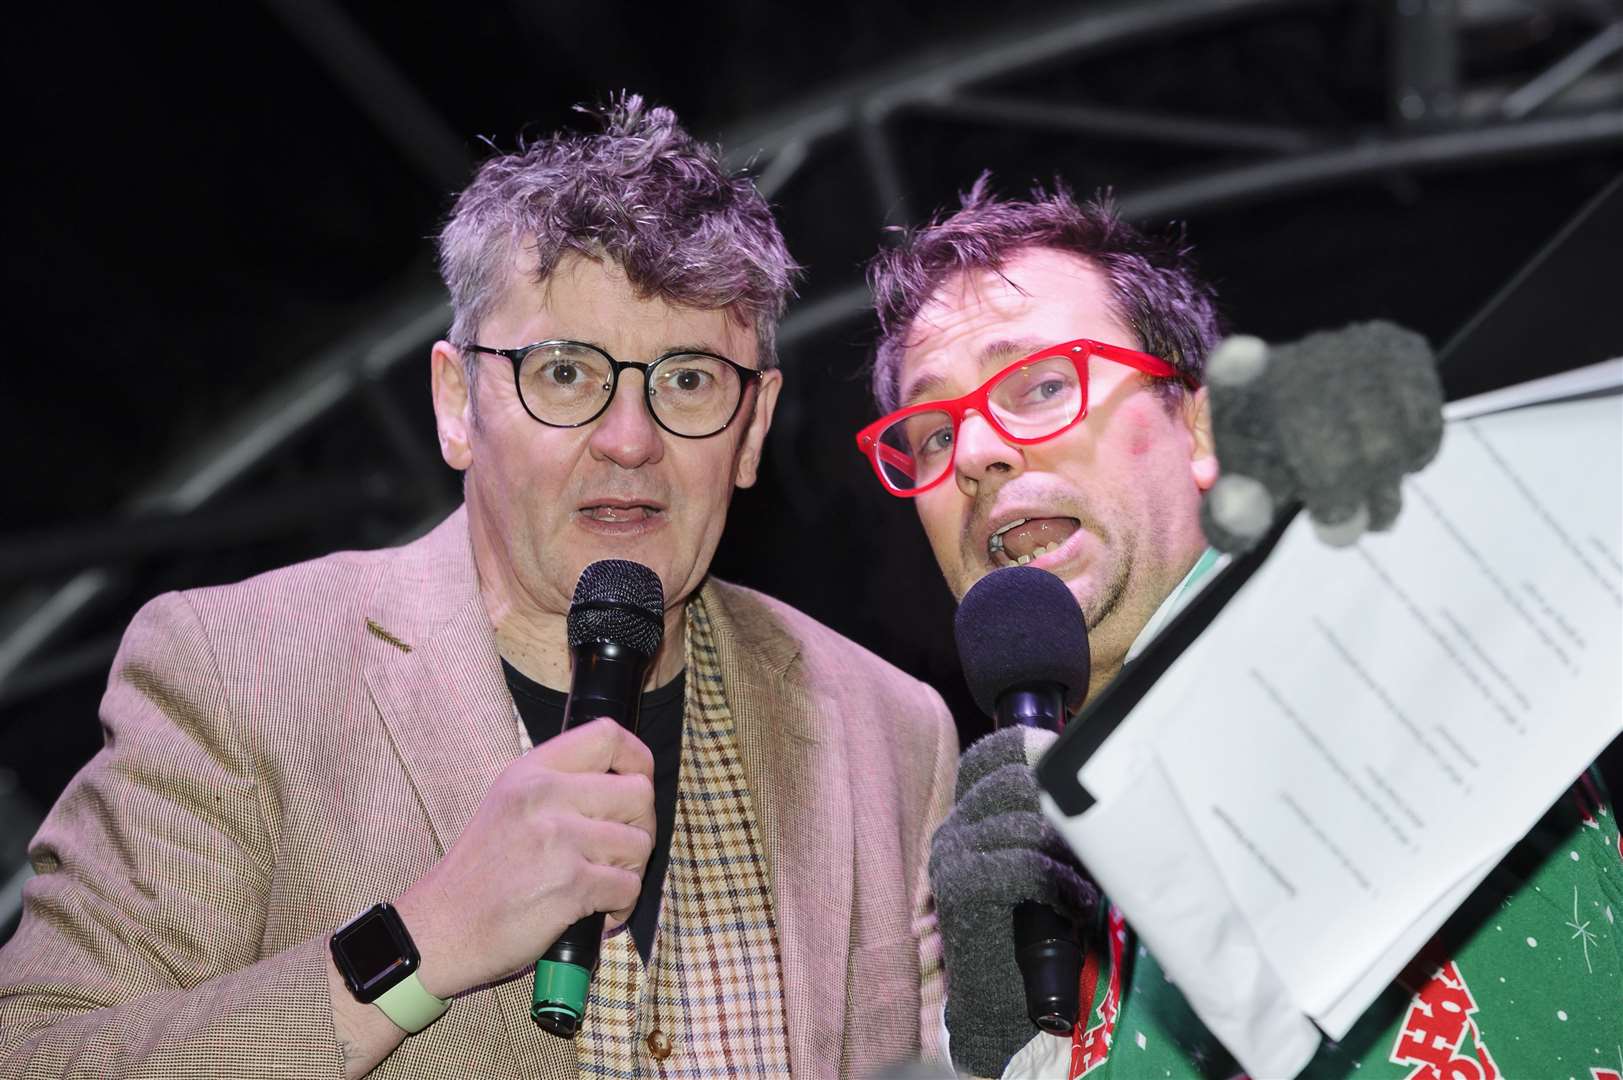 Joe Pasquale with host Adam Hoffman at the Dartford Christmas lights switch-on in 2016. Picture: Andy Payton